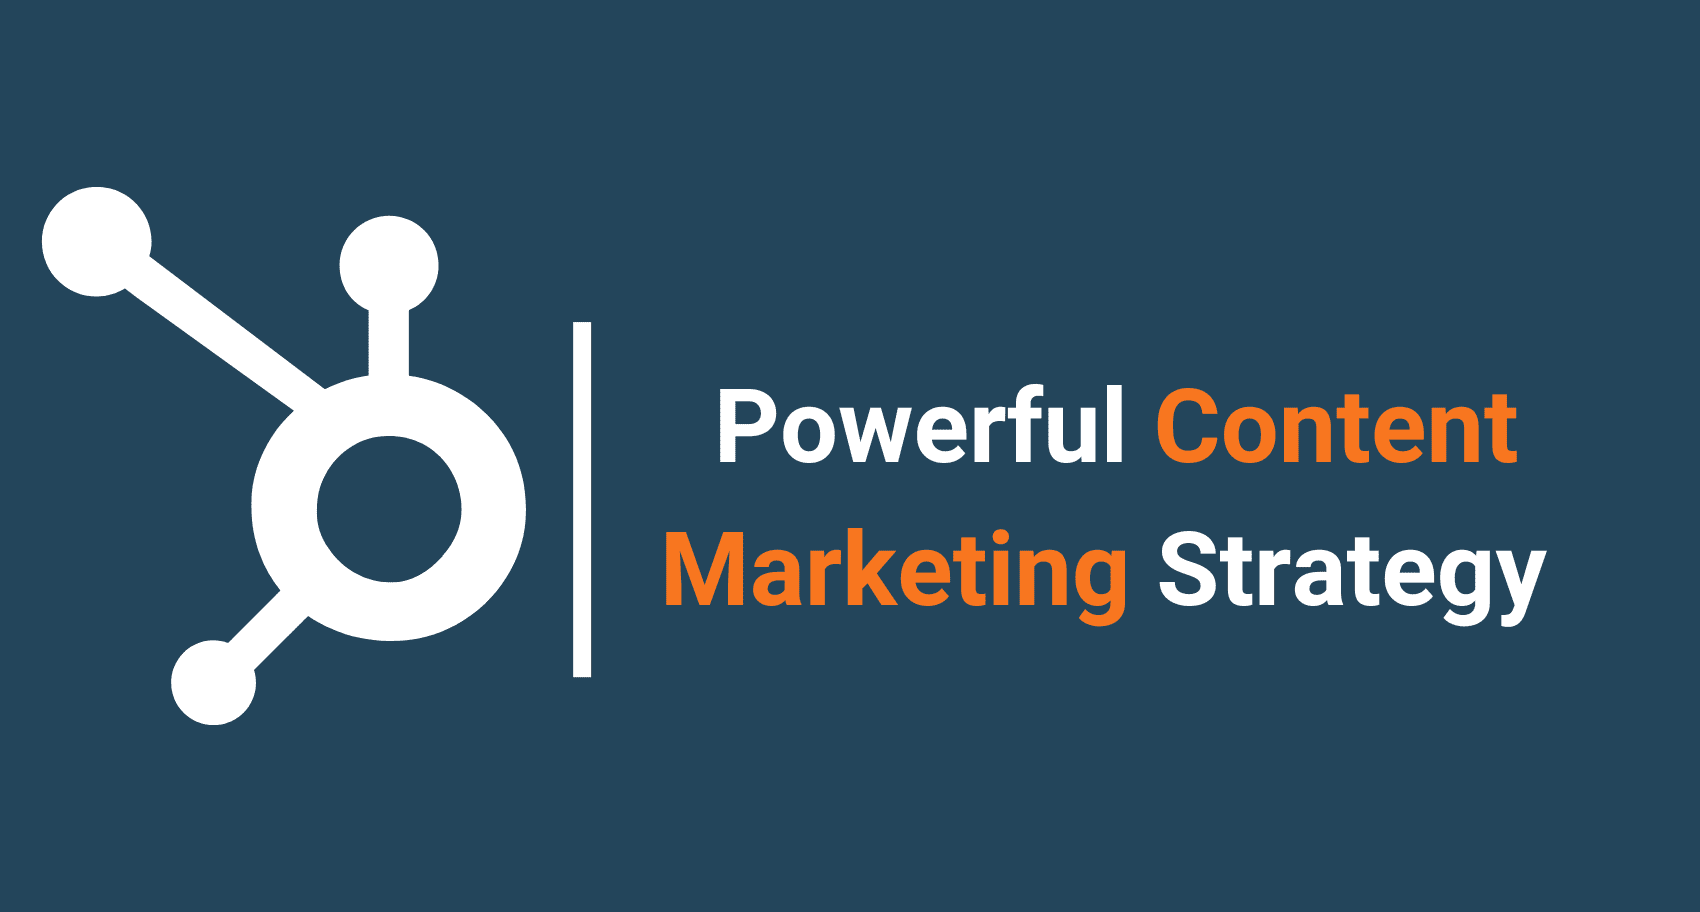 How to Build a Powerful Content Marketing Strategy with HubSpot